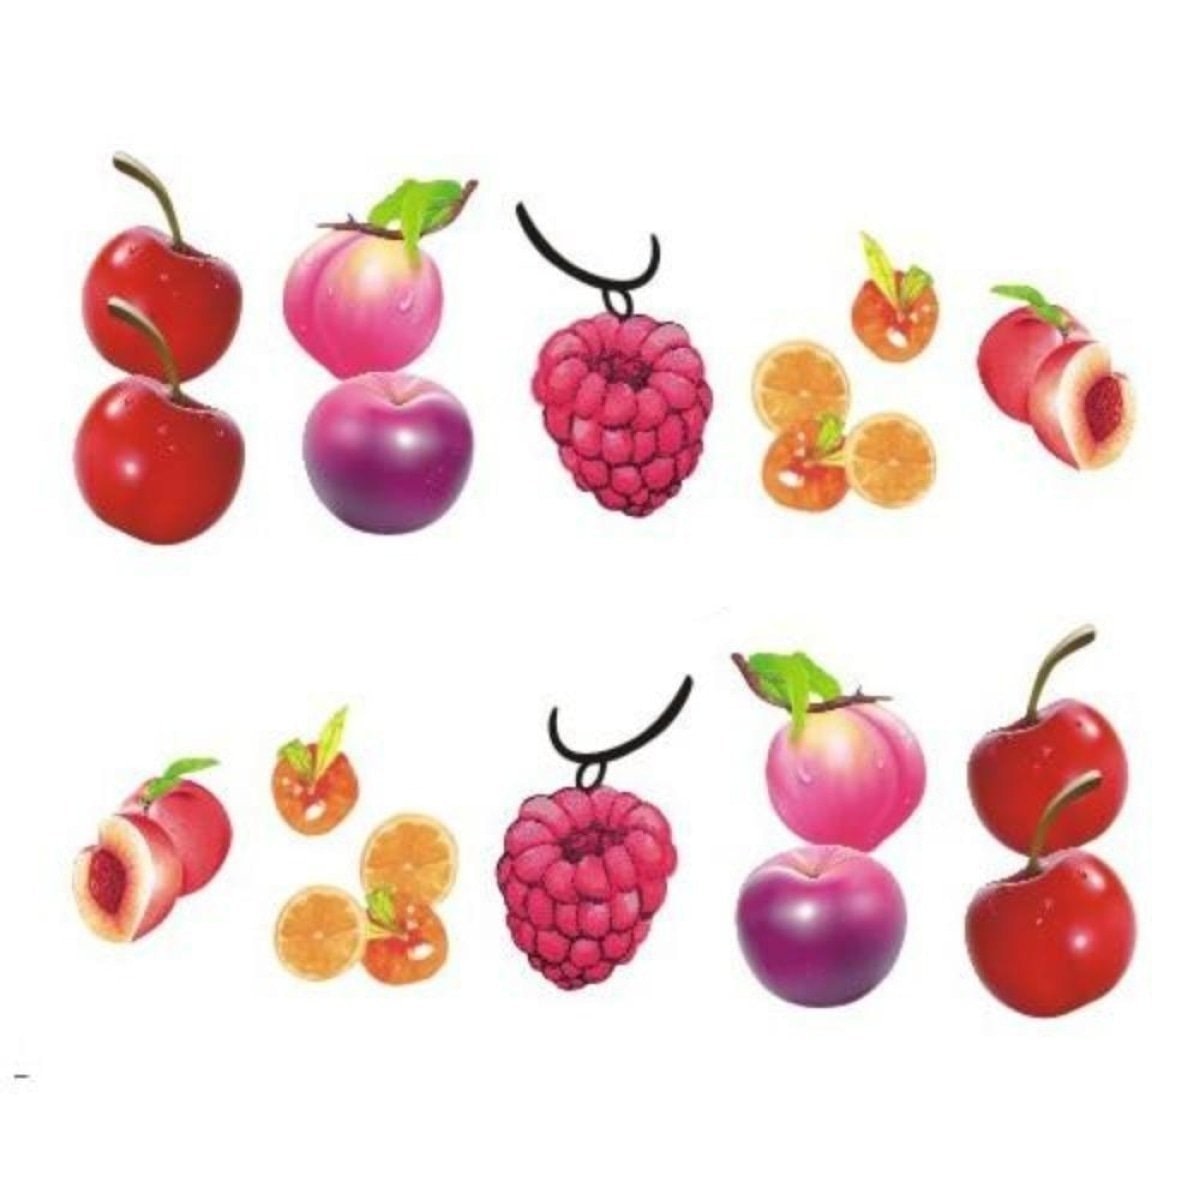 Strawberry Summer Cake & Fruit Stickers For Nails Nail Manicure Art - Stz-485 Sheet